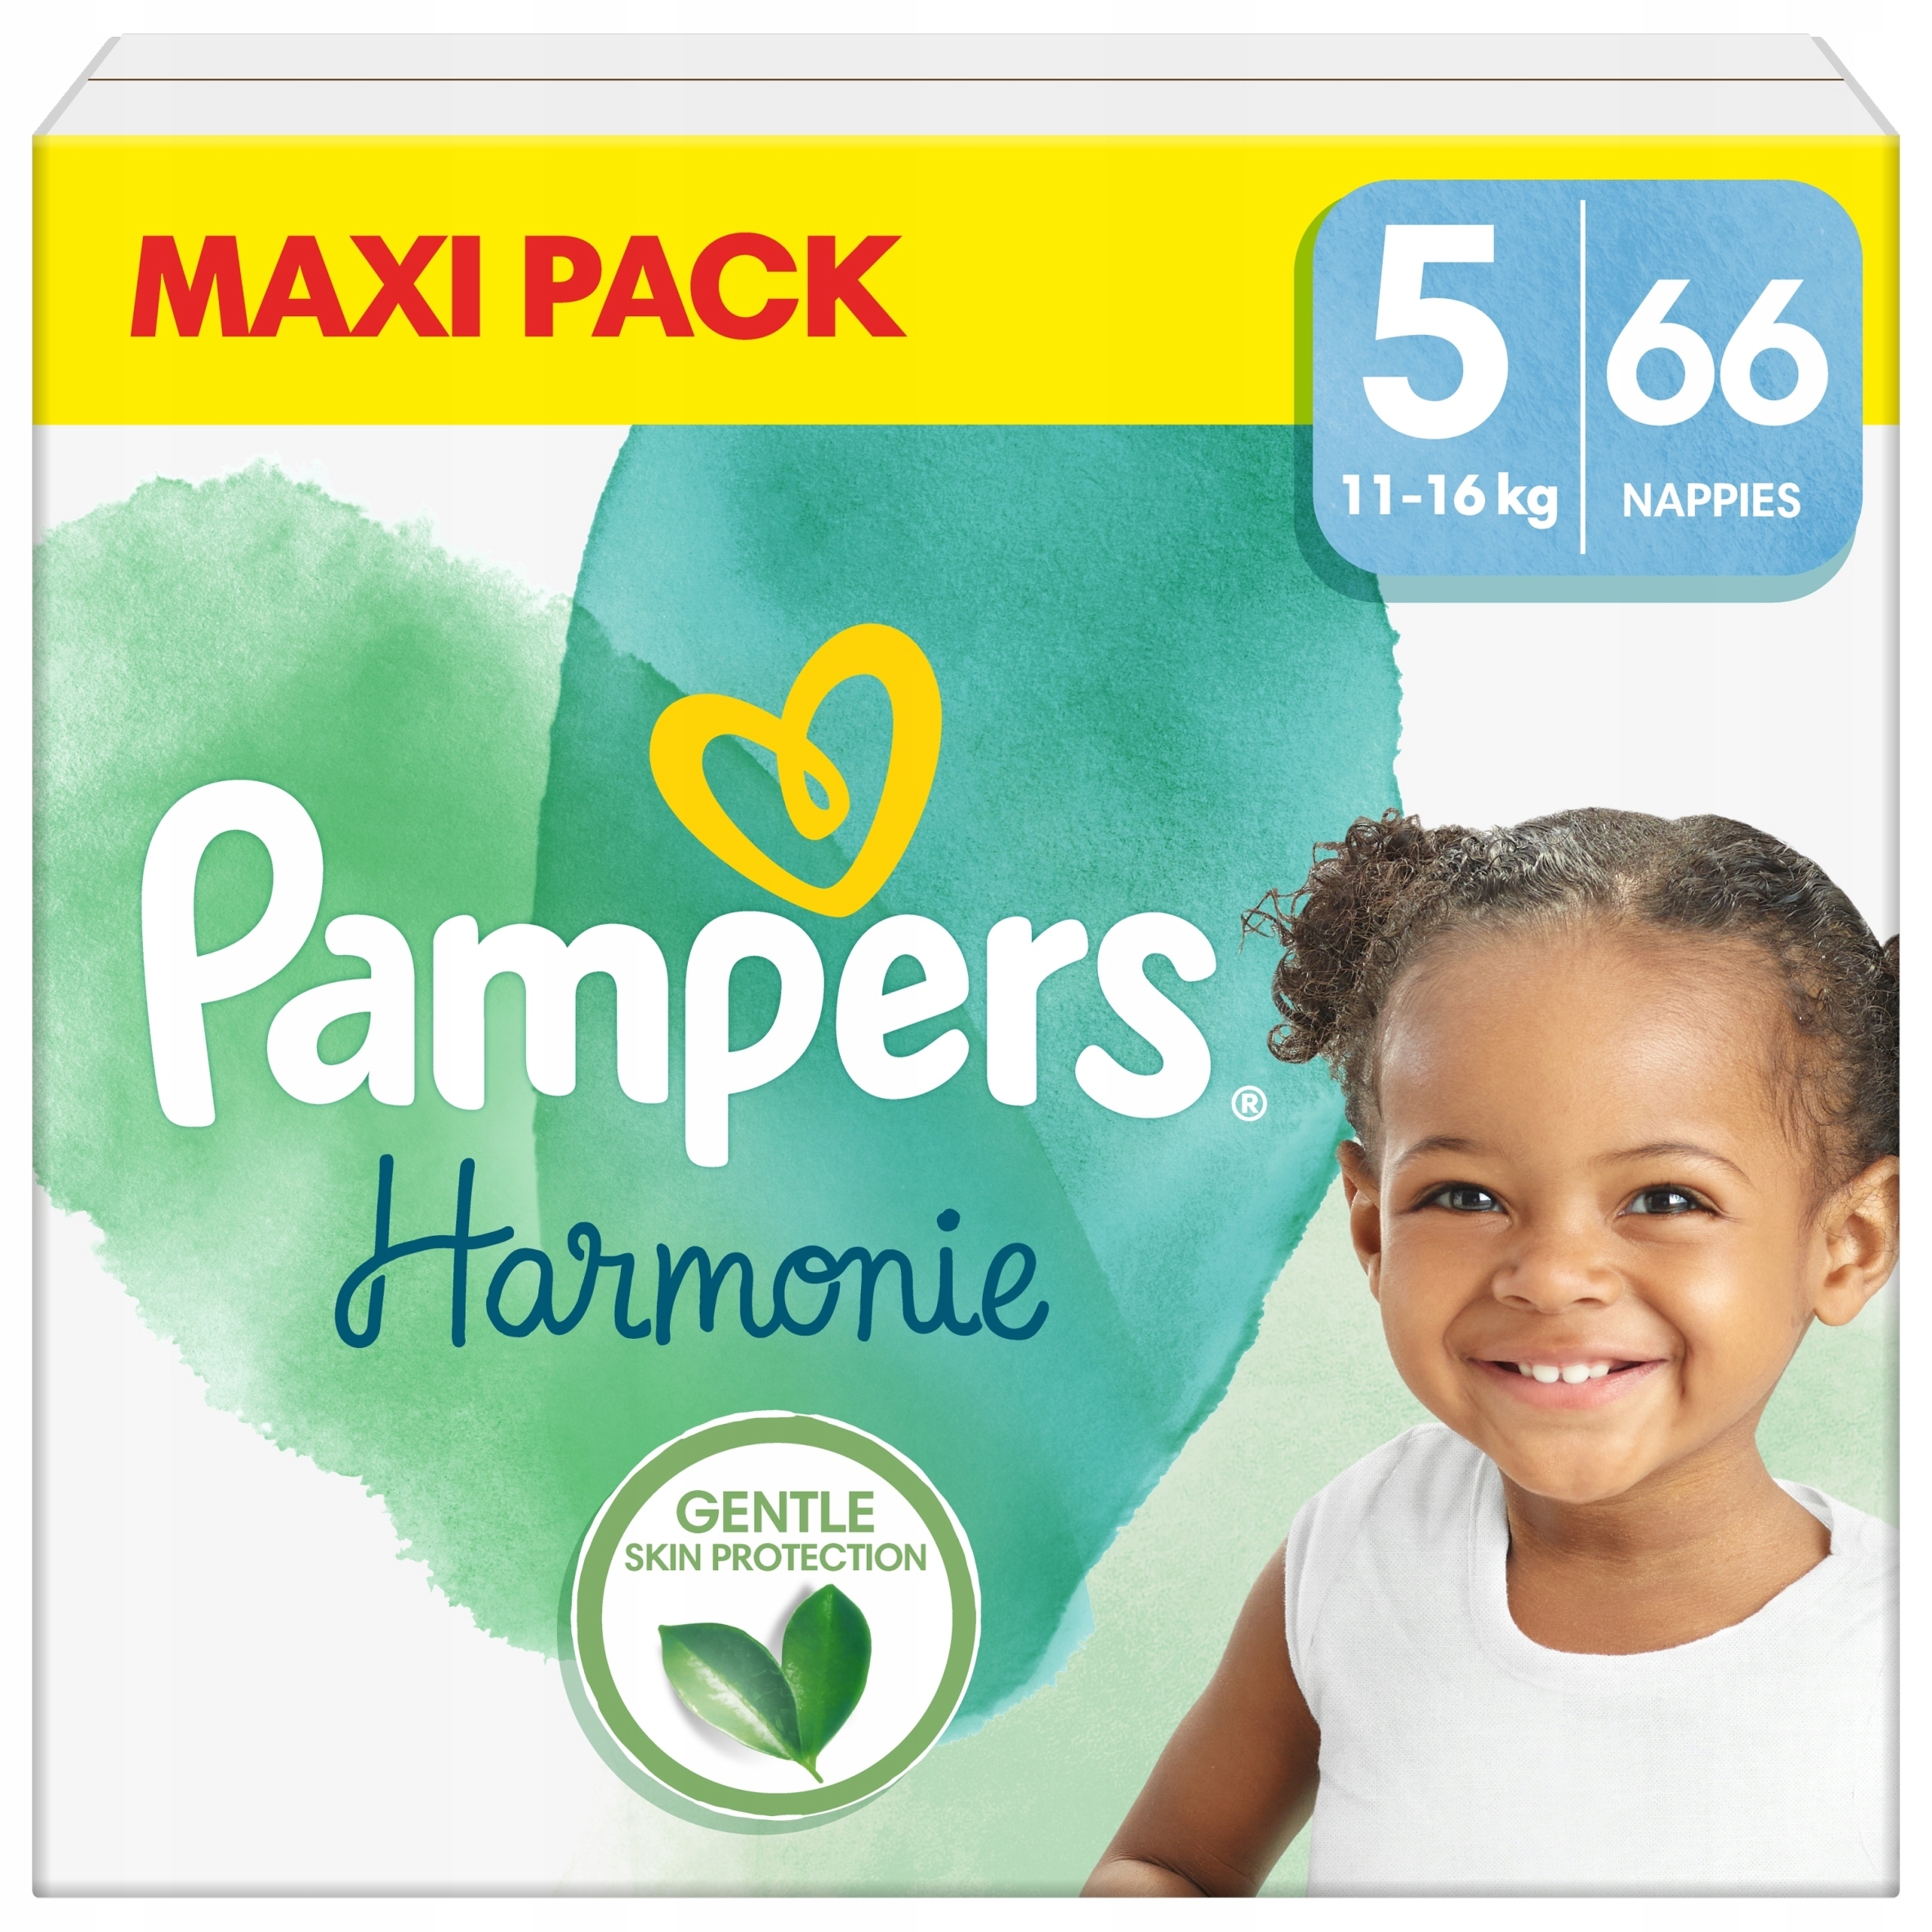 procter & gamble pampers